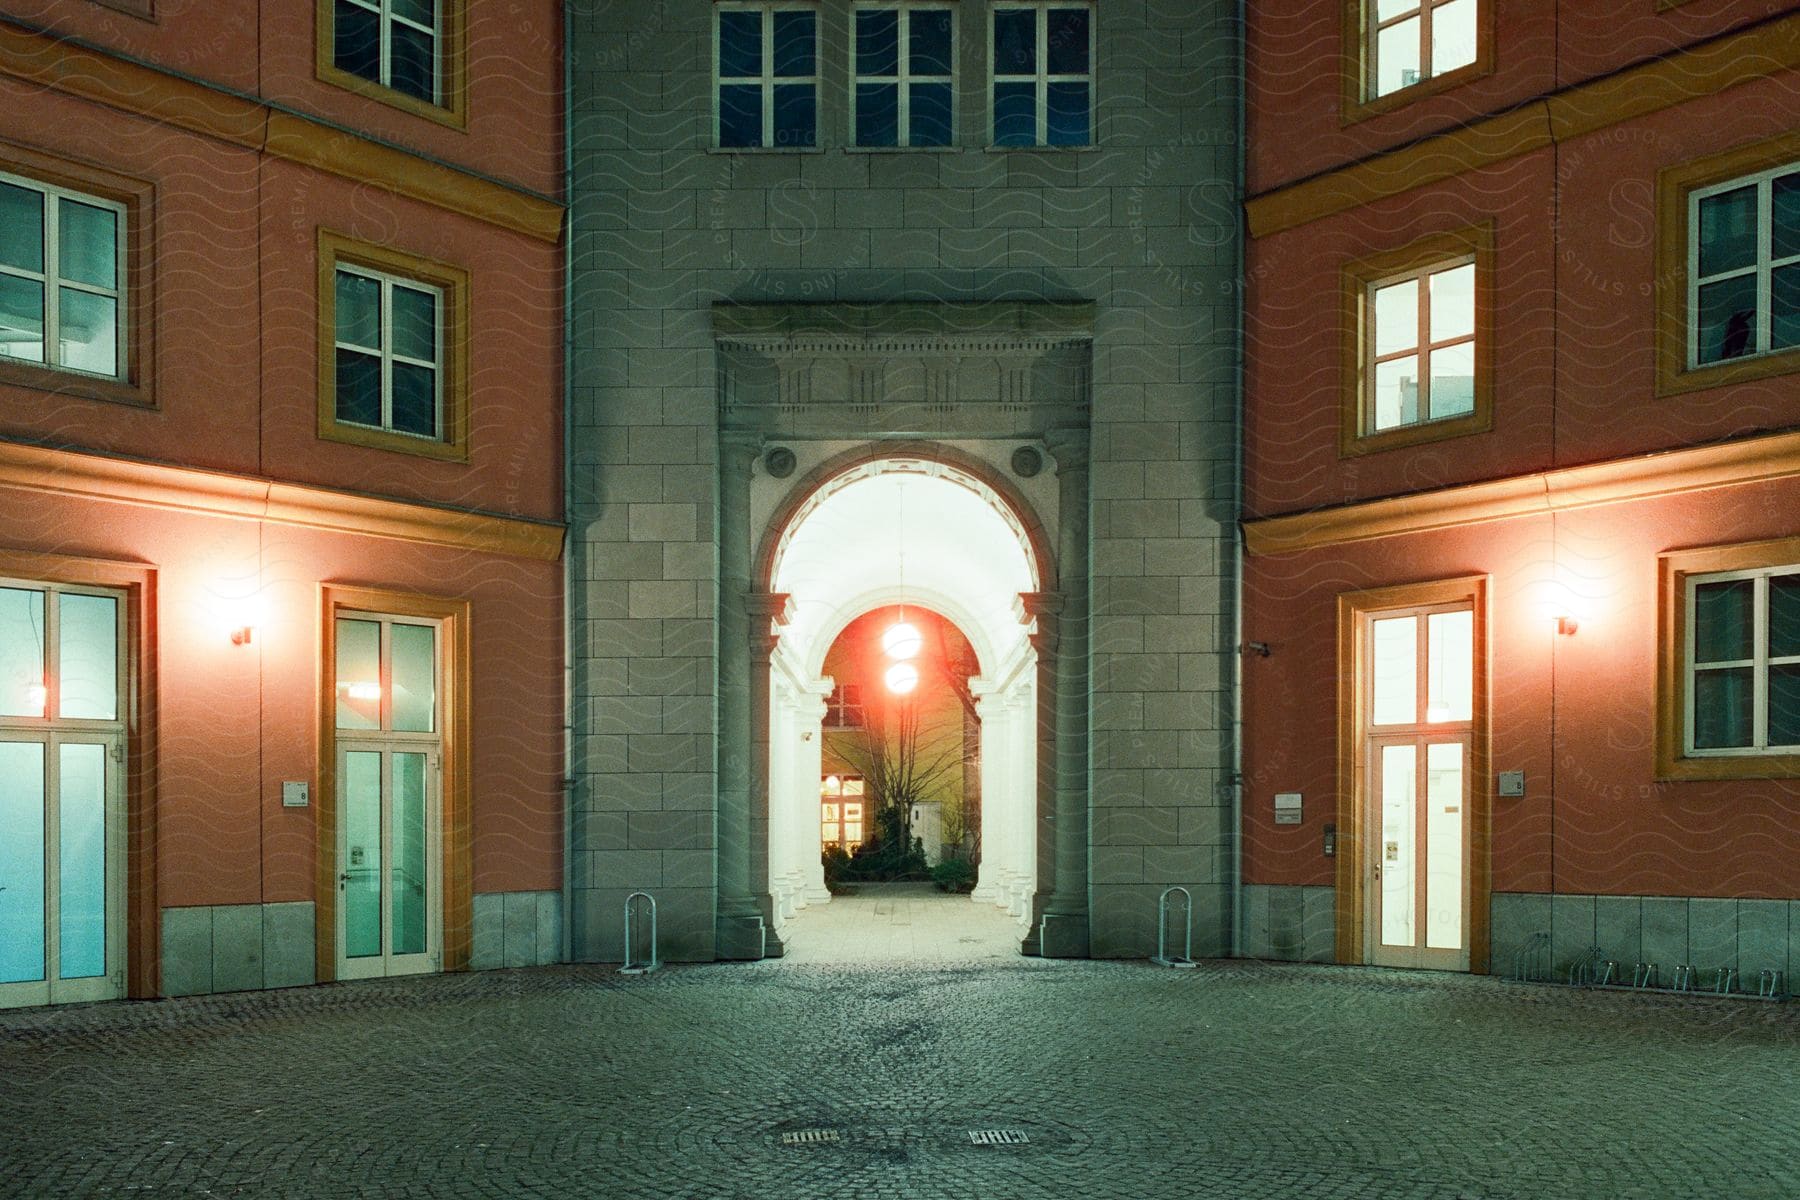 A Brightly Lit Central Passage Between Two Orange Buildings With The Window Lights On